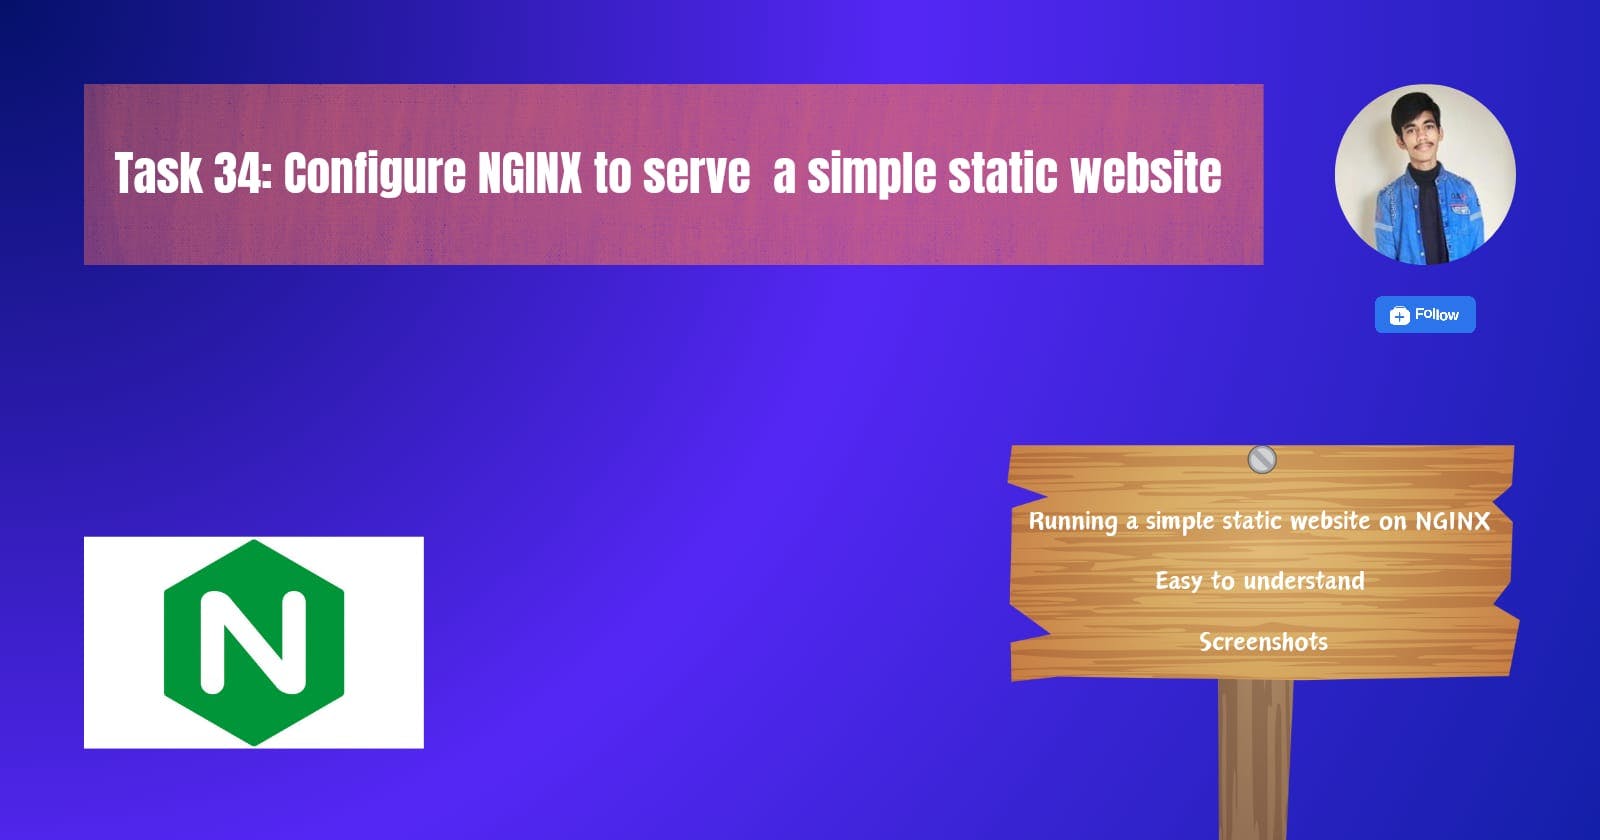 Day 34: Serve a simple static website on NGINX.